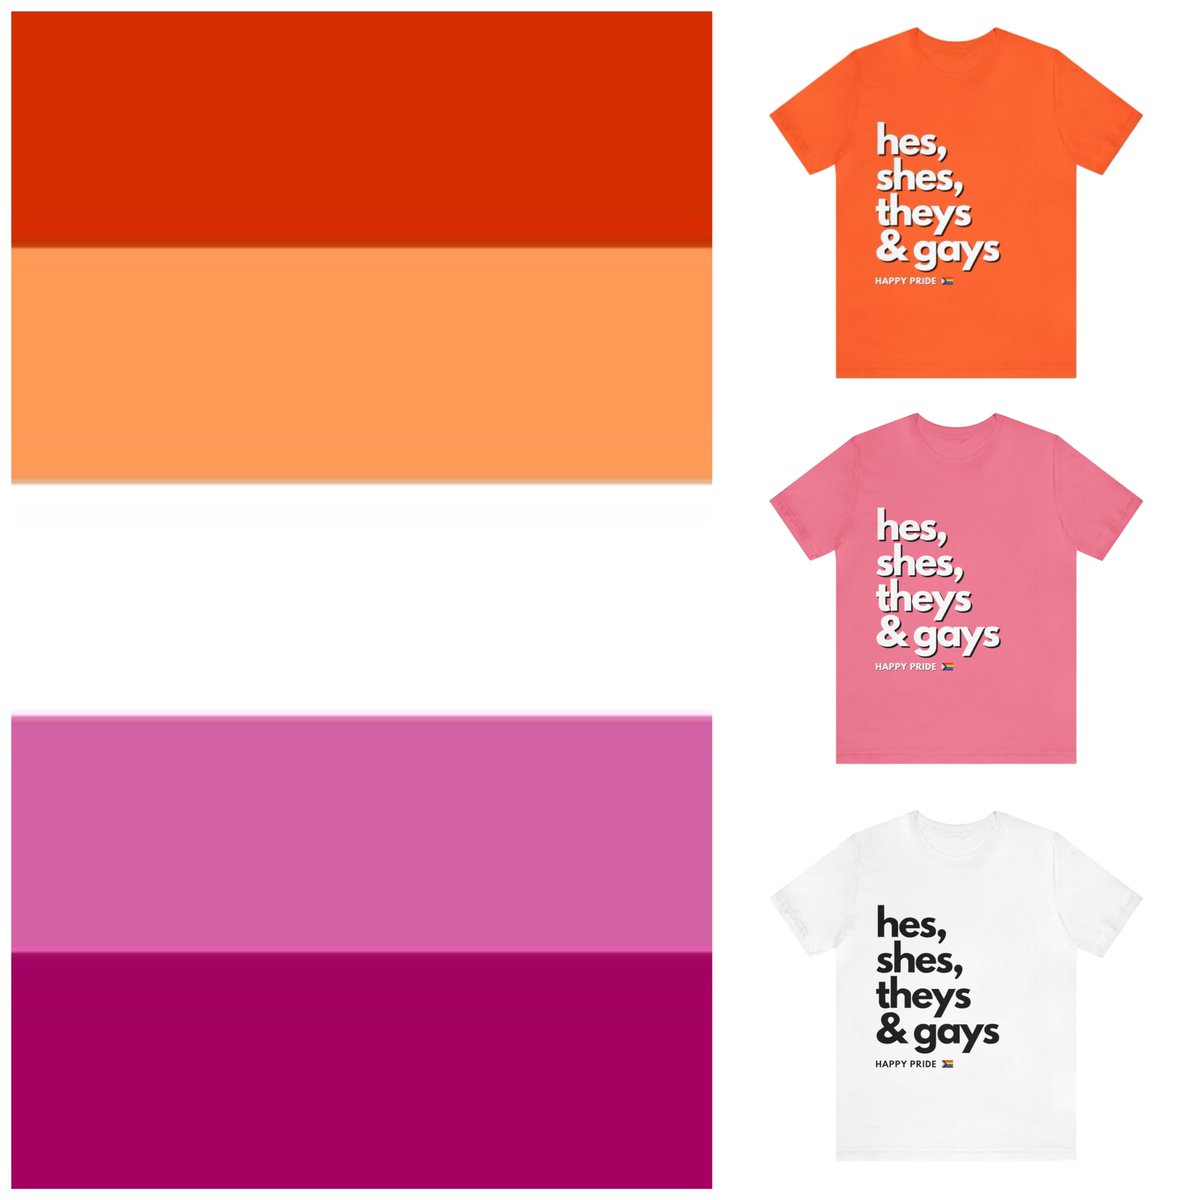 Do you know what the colors of the #LesbianPride flag represent? Each color has a specific meaning:

•Dark Orange: Gender nonconformity

•Light Orange: Independence 

•White: Unique relationships to womanhood 

•Light Pink: Serenity and peace 

•Dark Pink: Love and sex